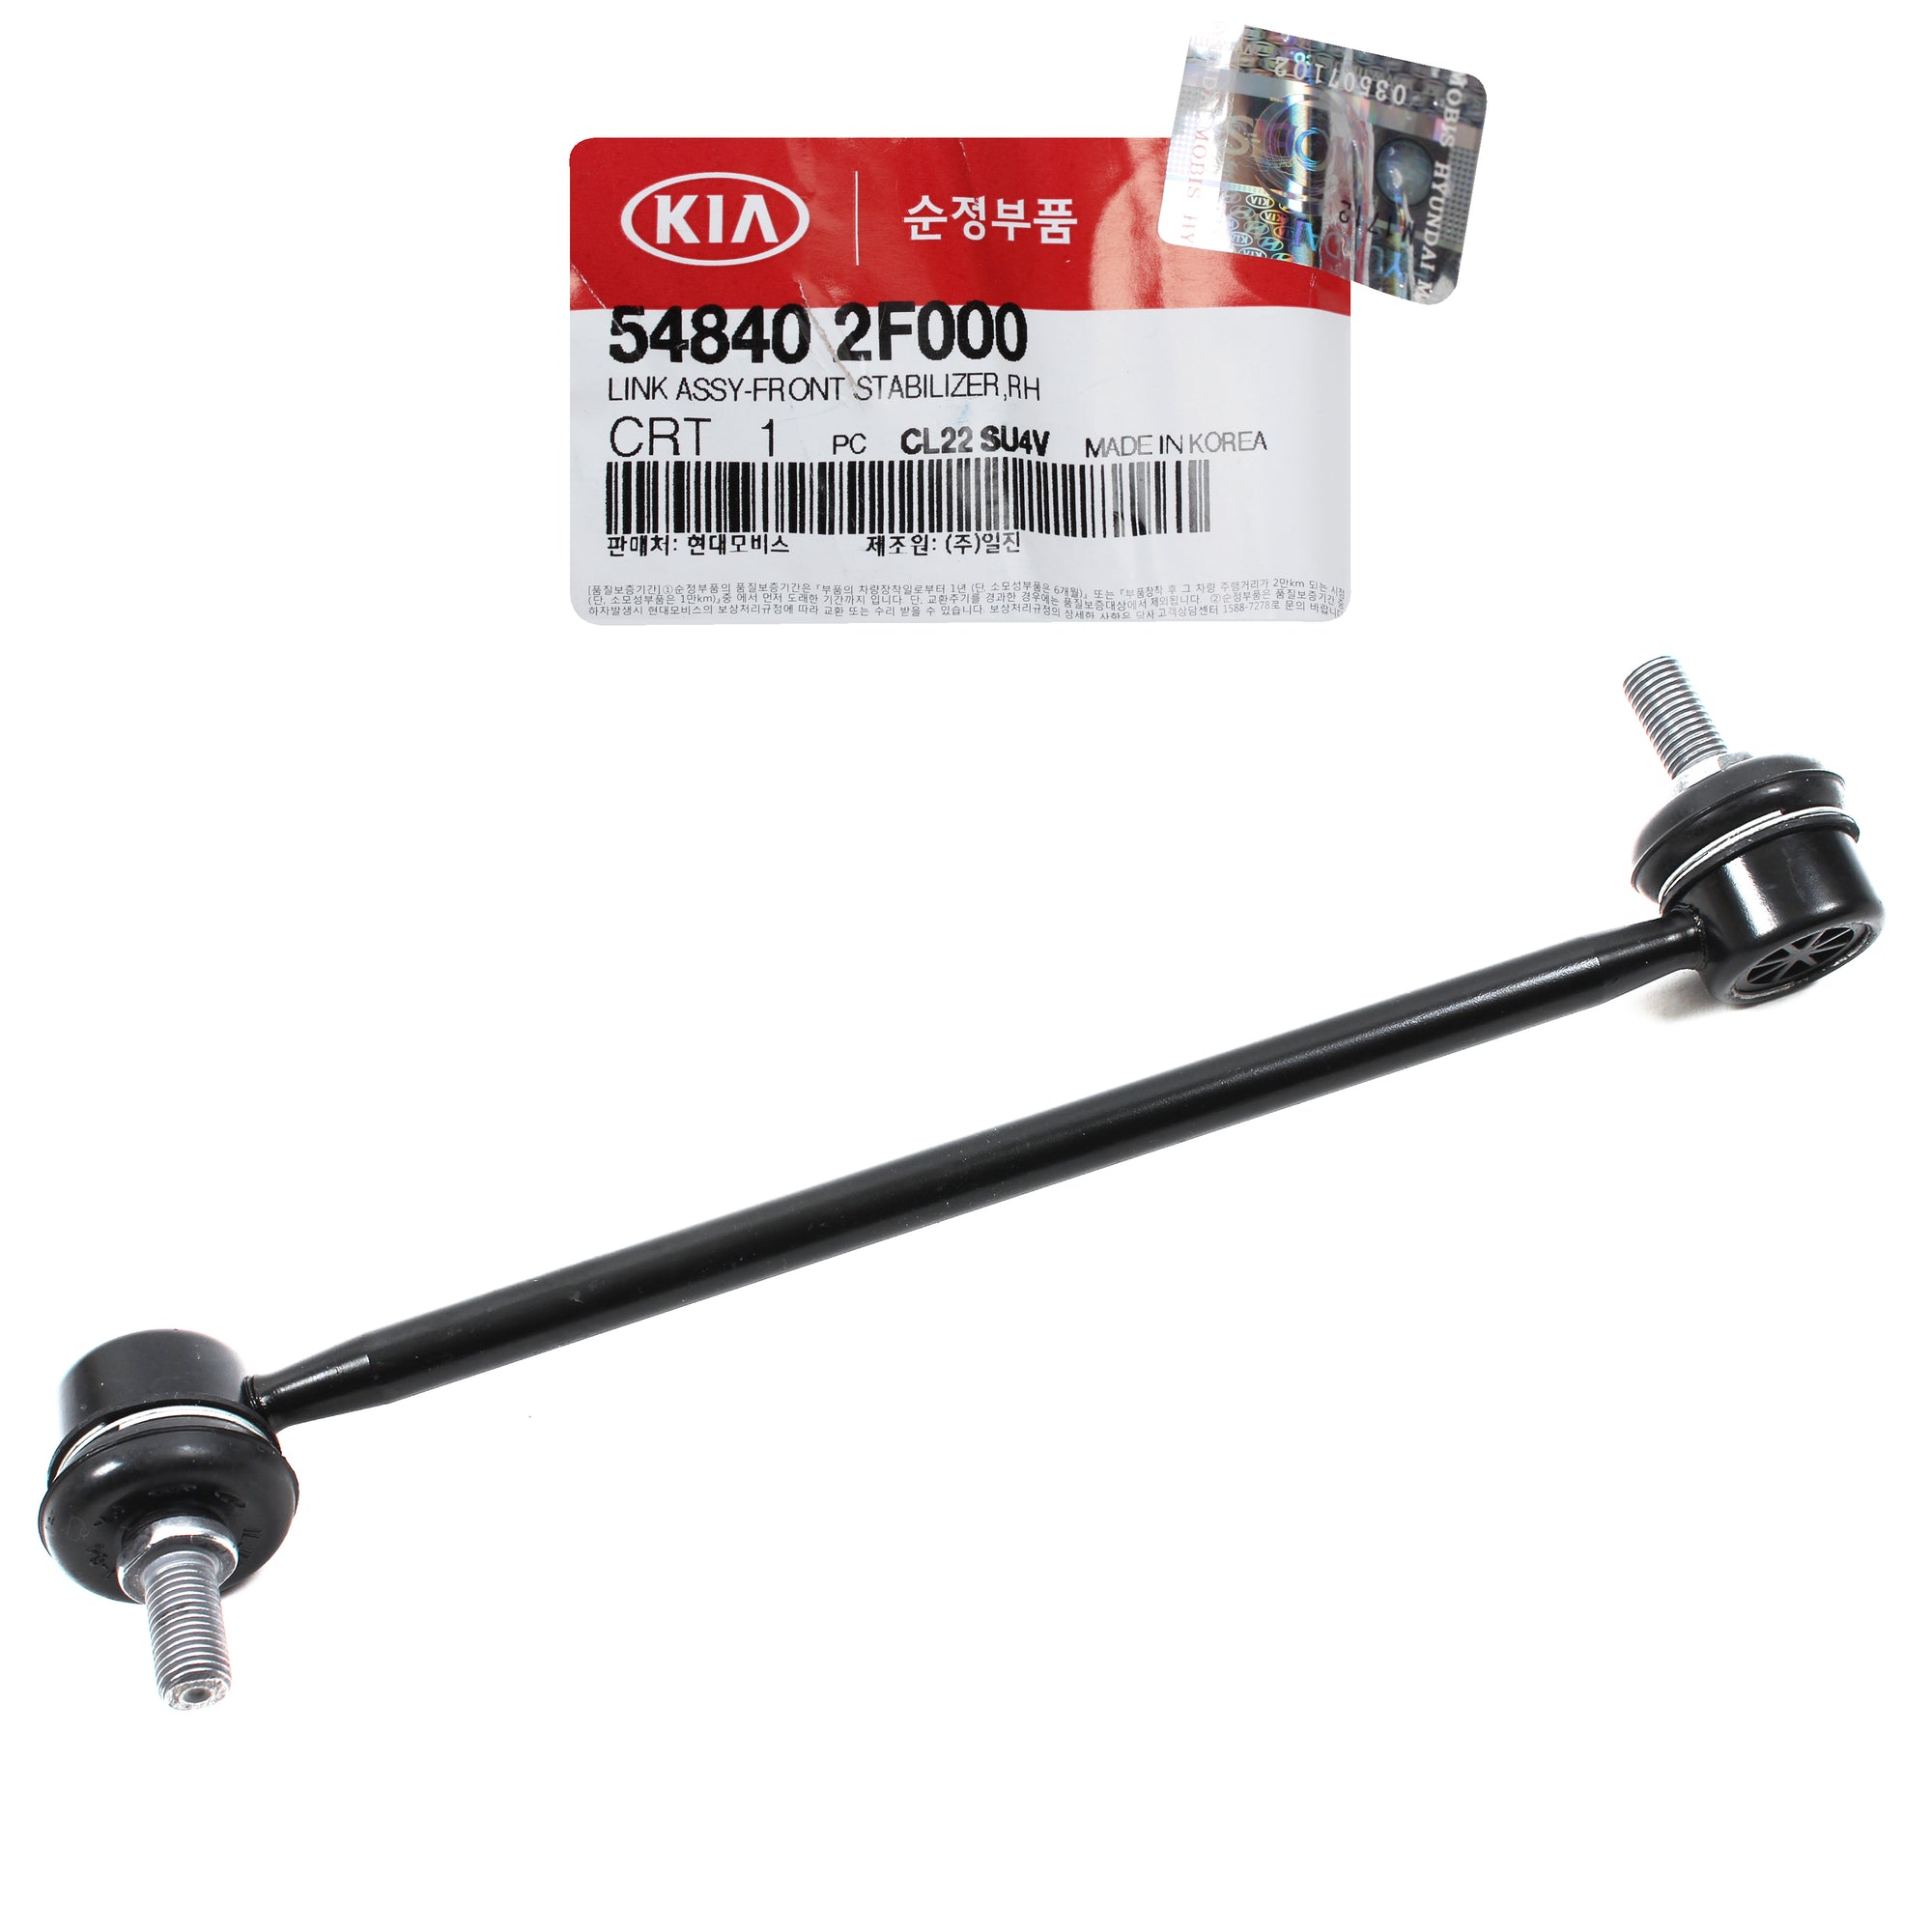 GENUINE Stabilizer Sway Bar Link FRONT RIGHT for 04-09 Kia Spectra 548402F000